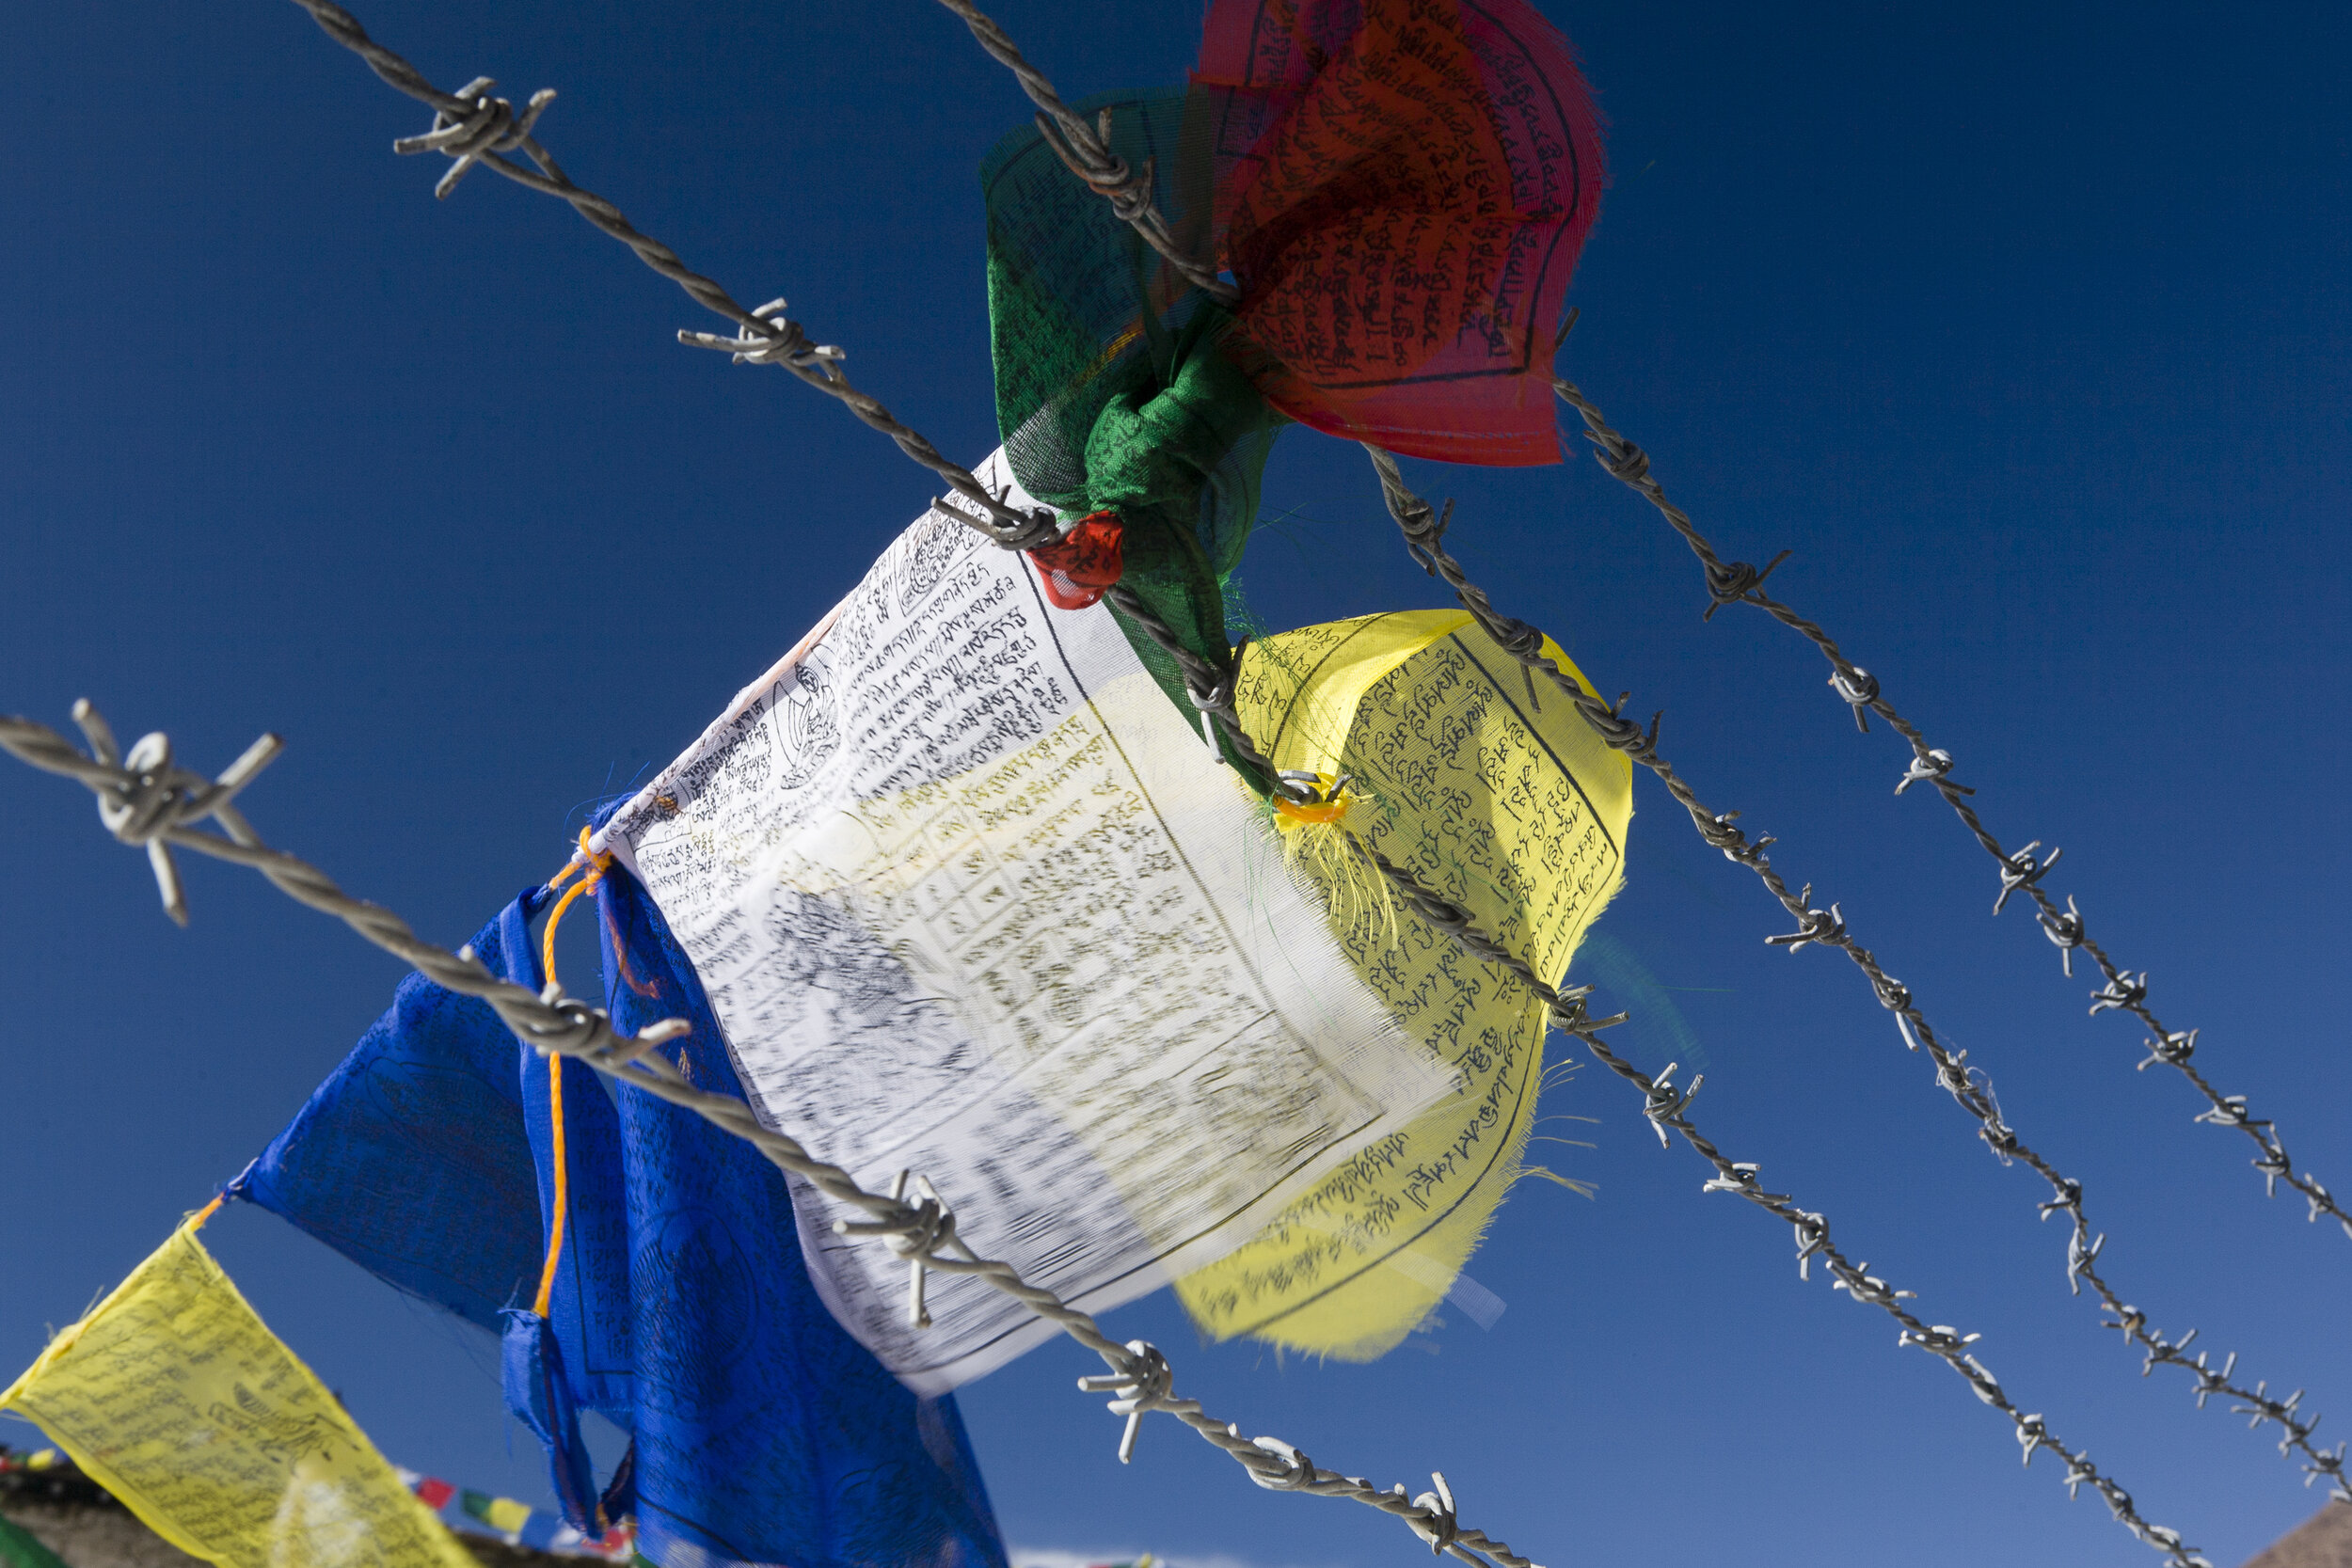  Barbed wire and Tibetan prayer flags protect the Muktinath-Chumig Gyatsa temple in a remote area on the Annapurna Circuit. 